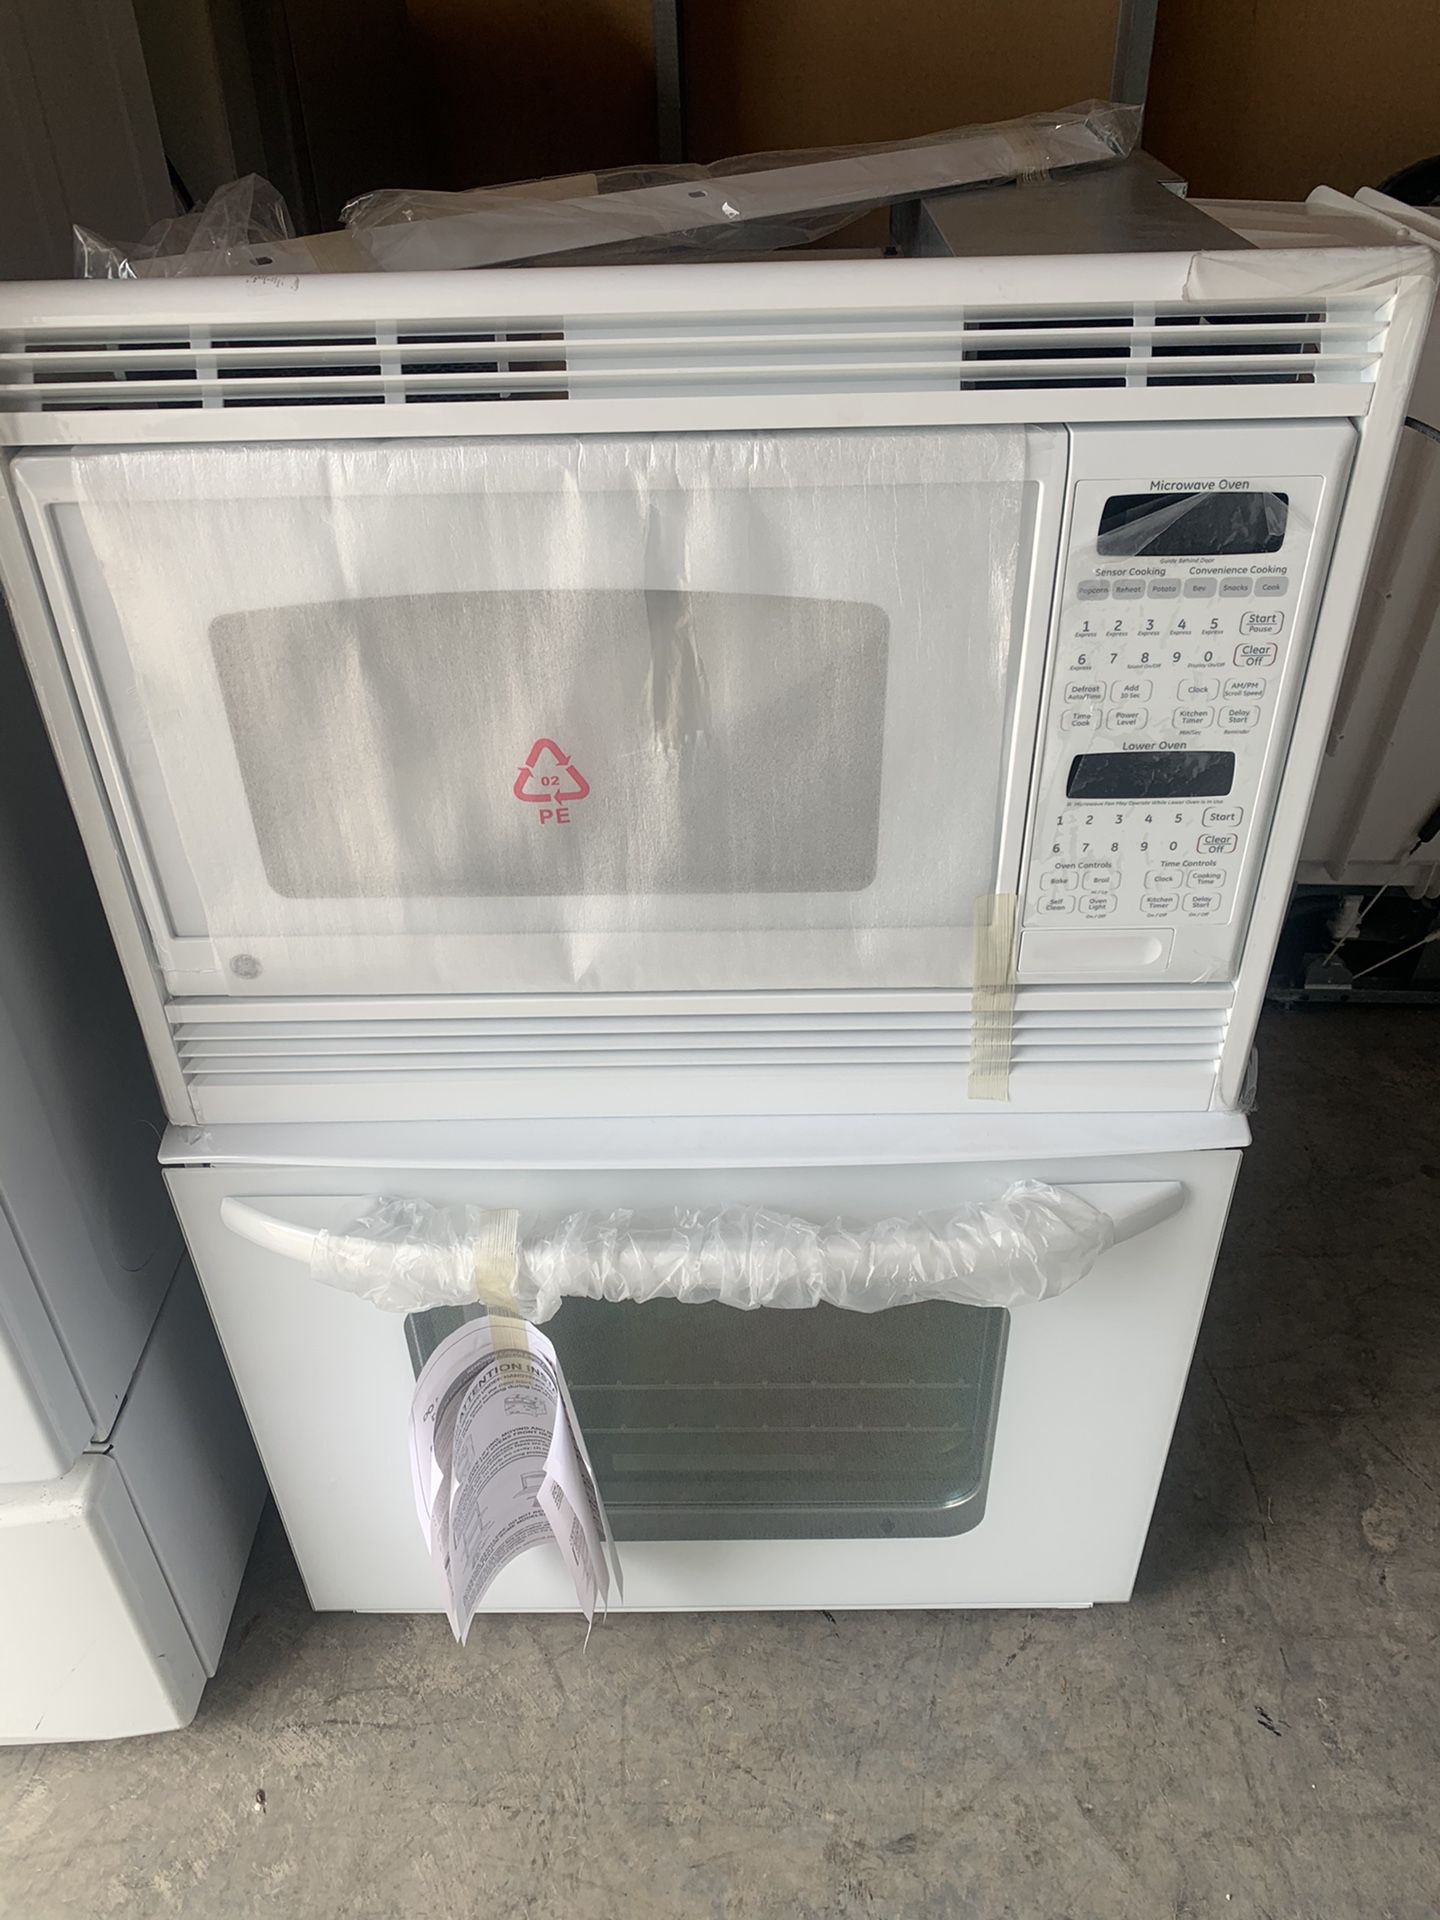 New Ge Oven & Microwave Combination